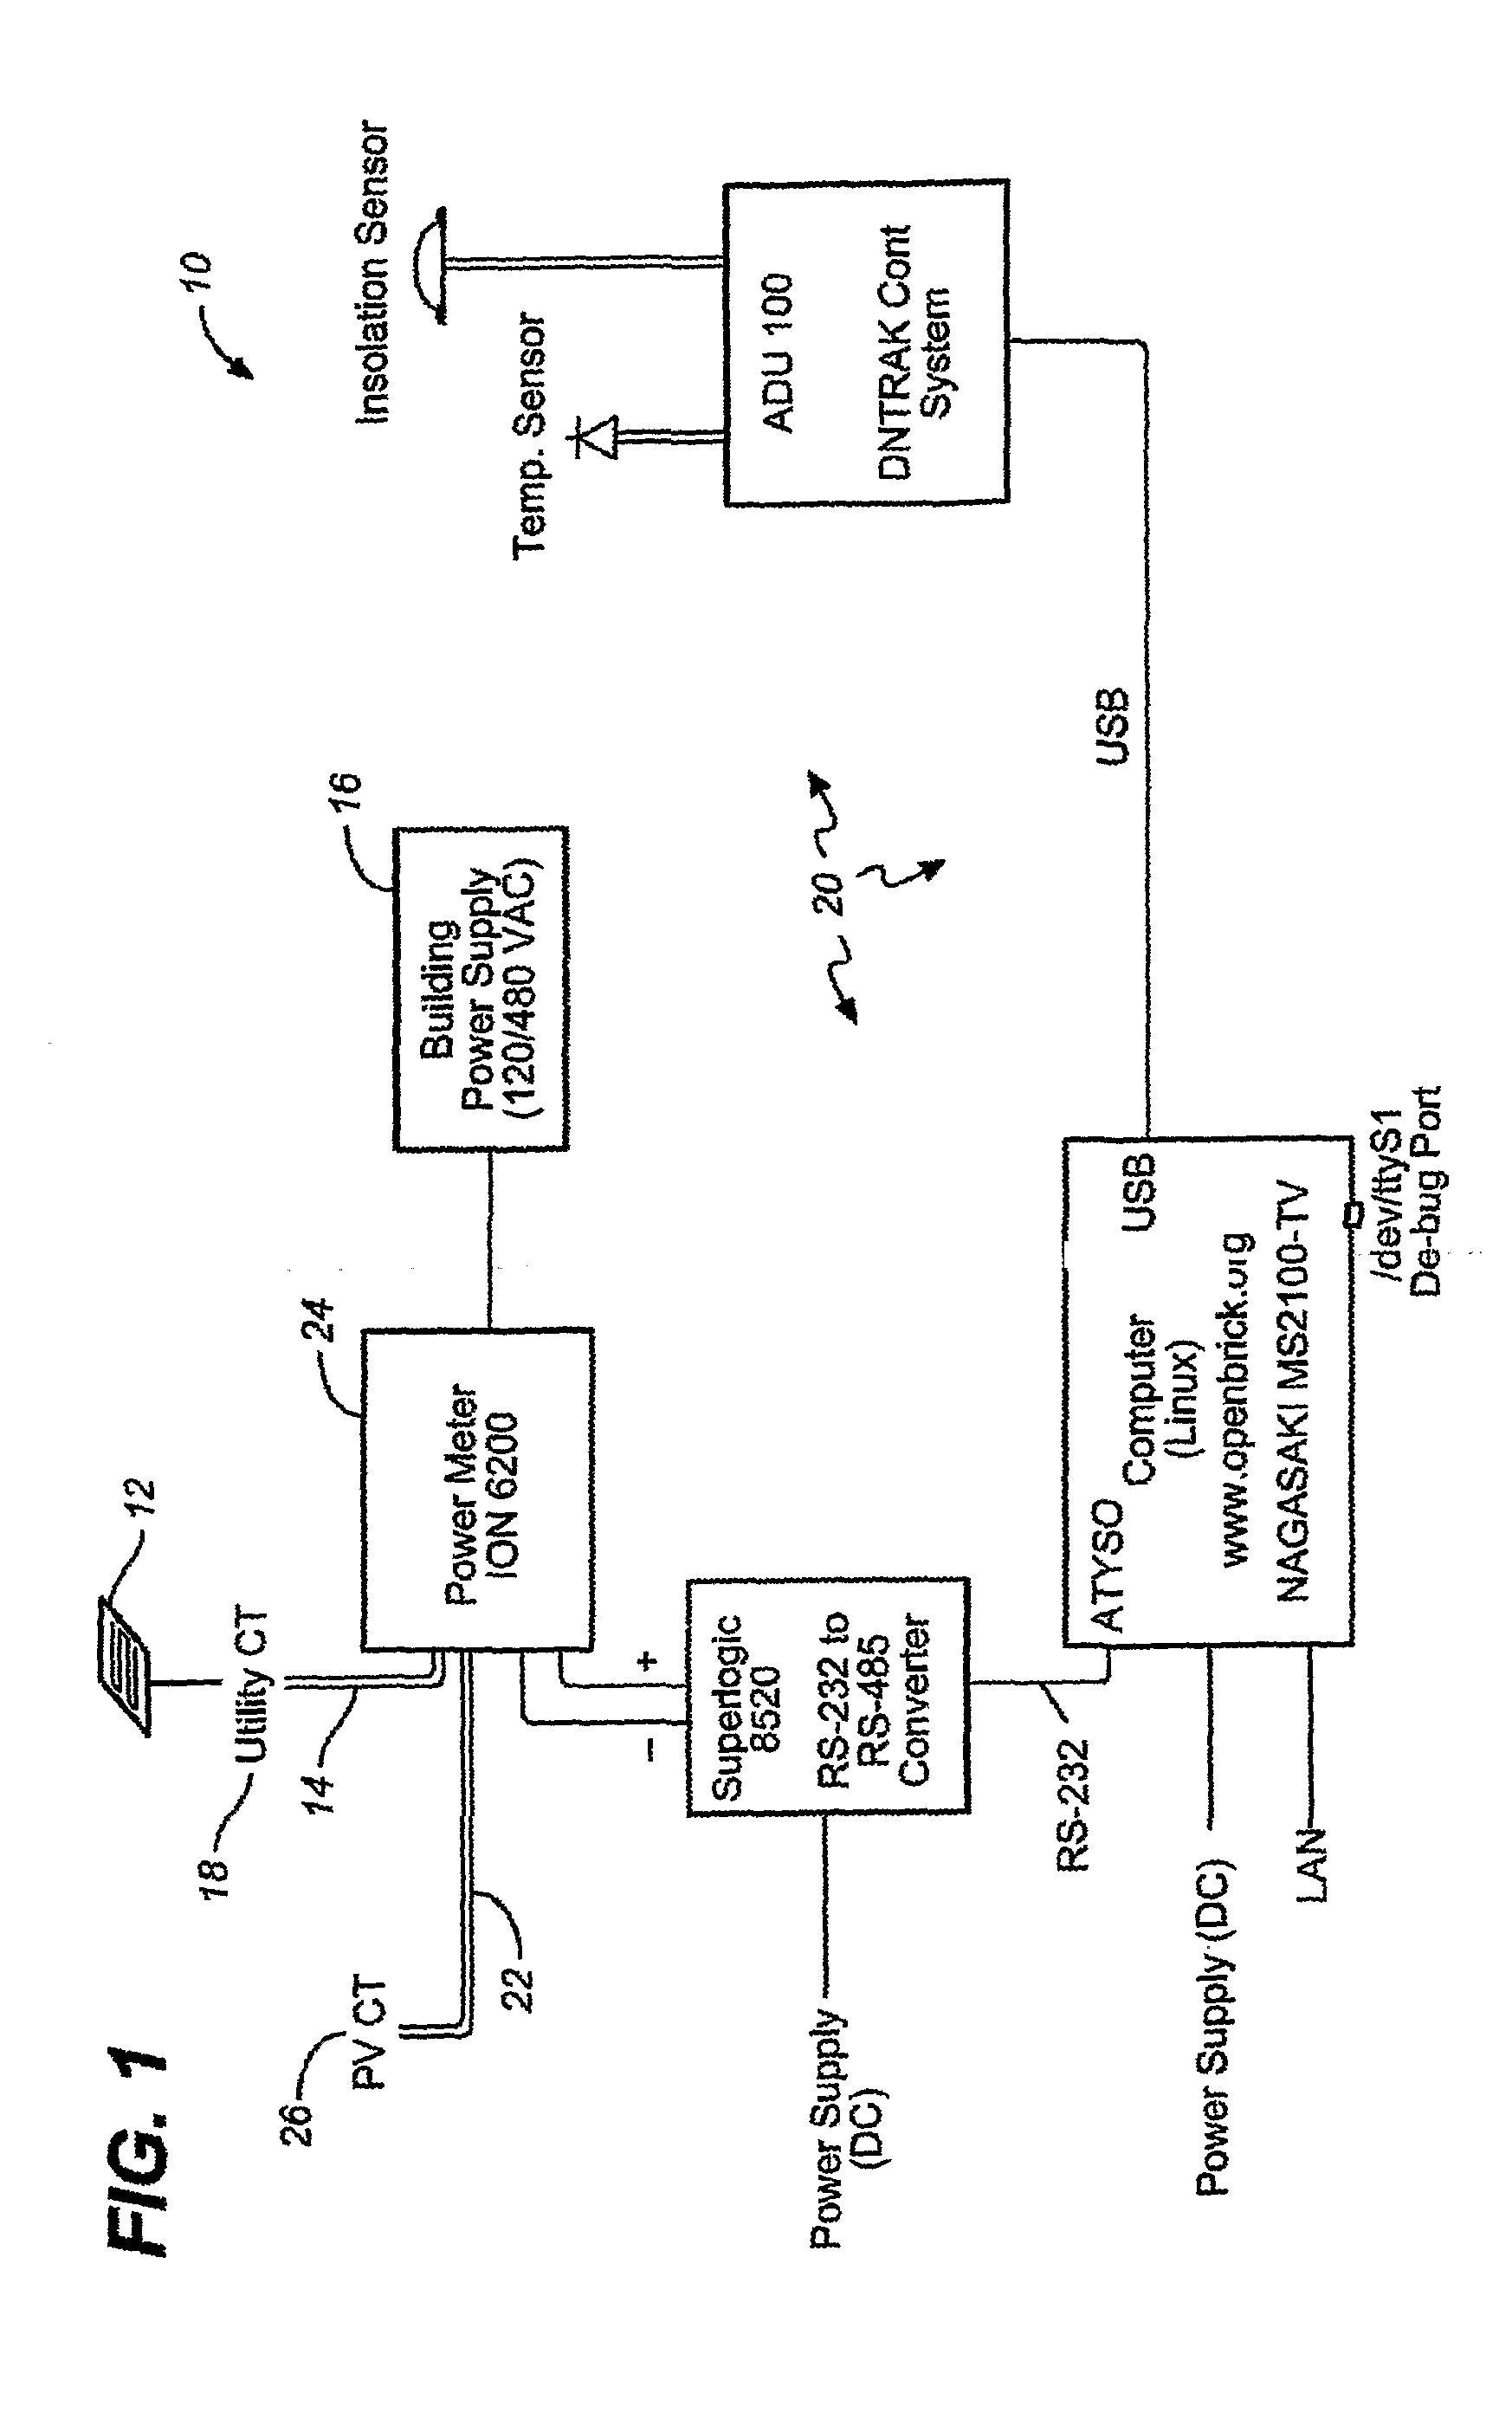 System and Method for Array and String Level Monitoring of a Grid-Connected Photovoltaic Power System